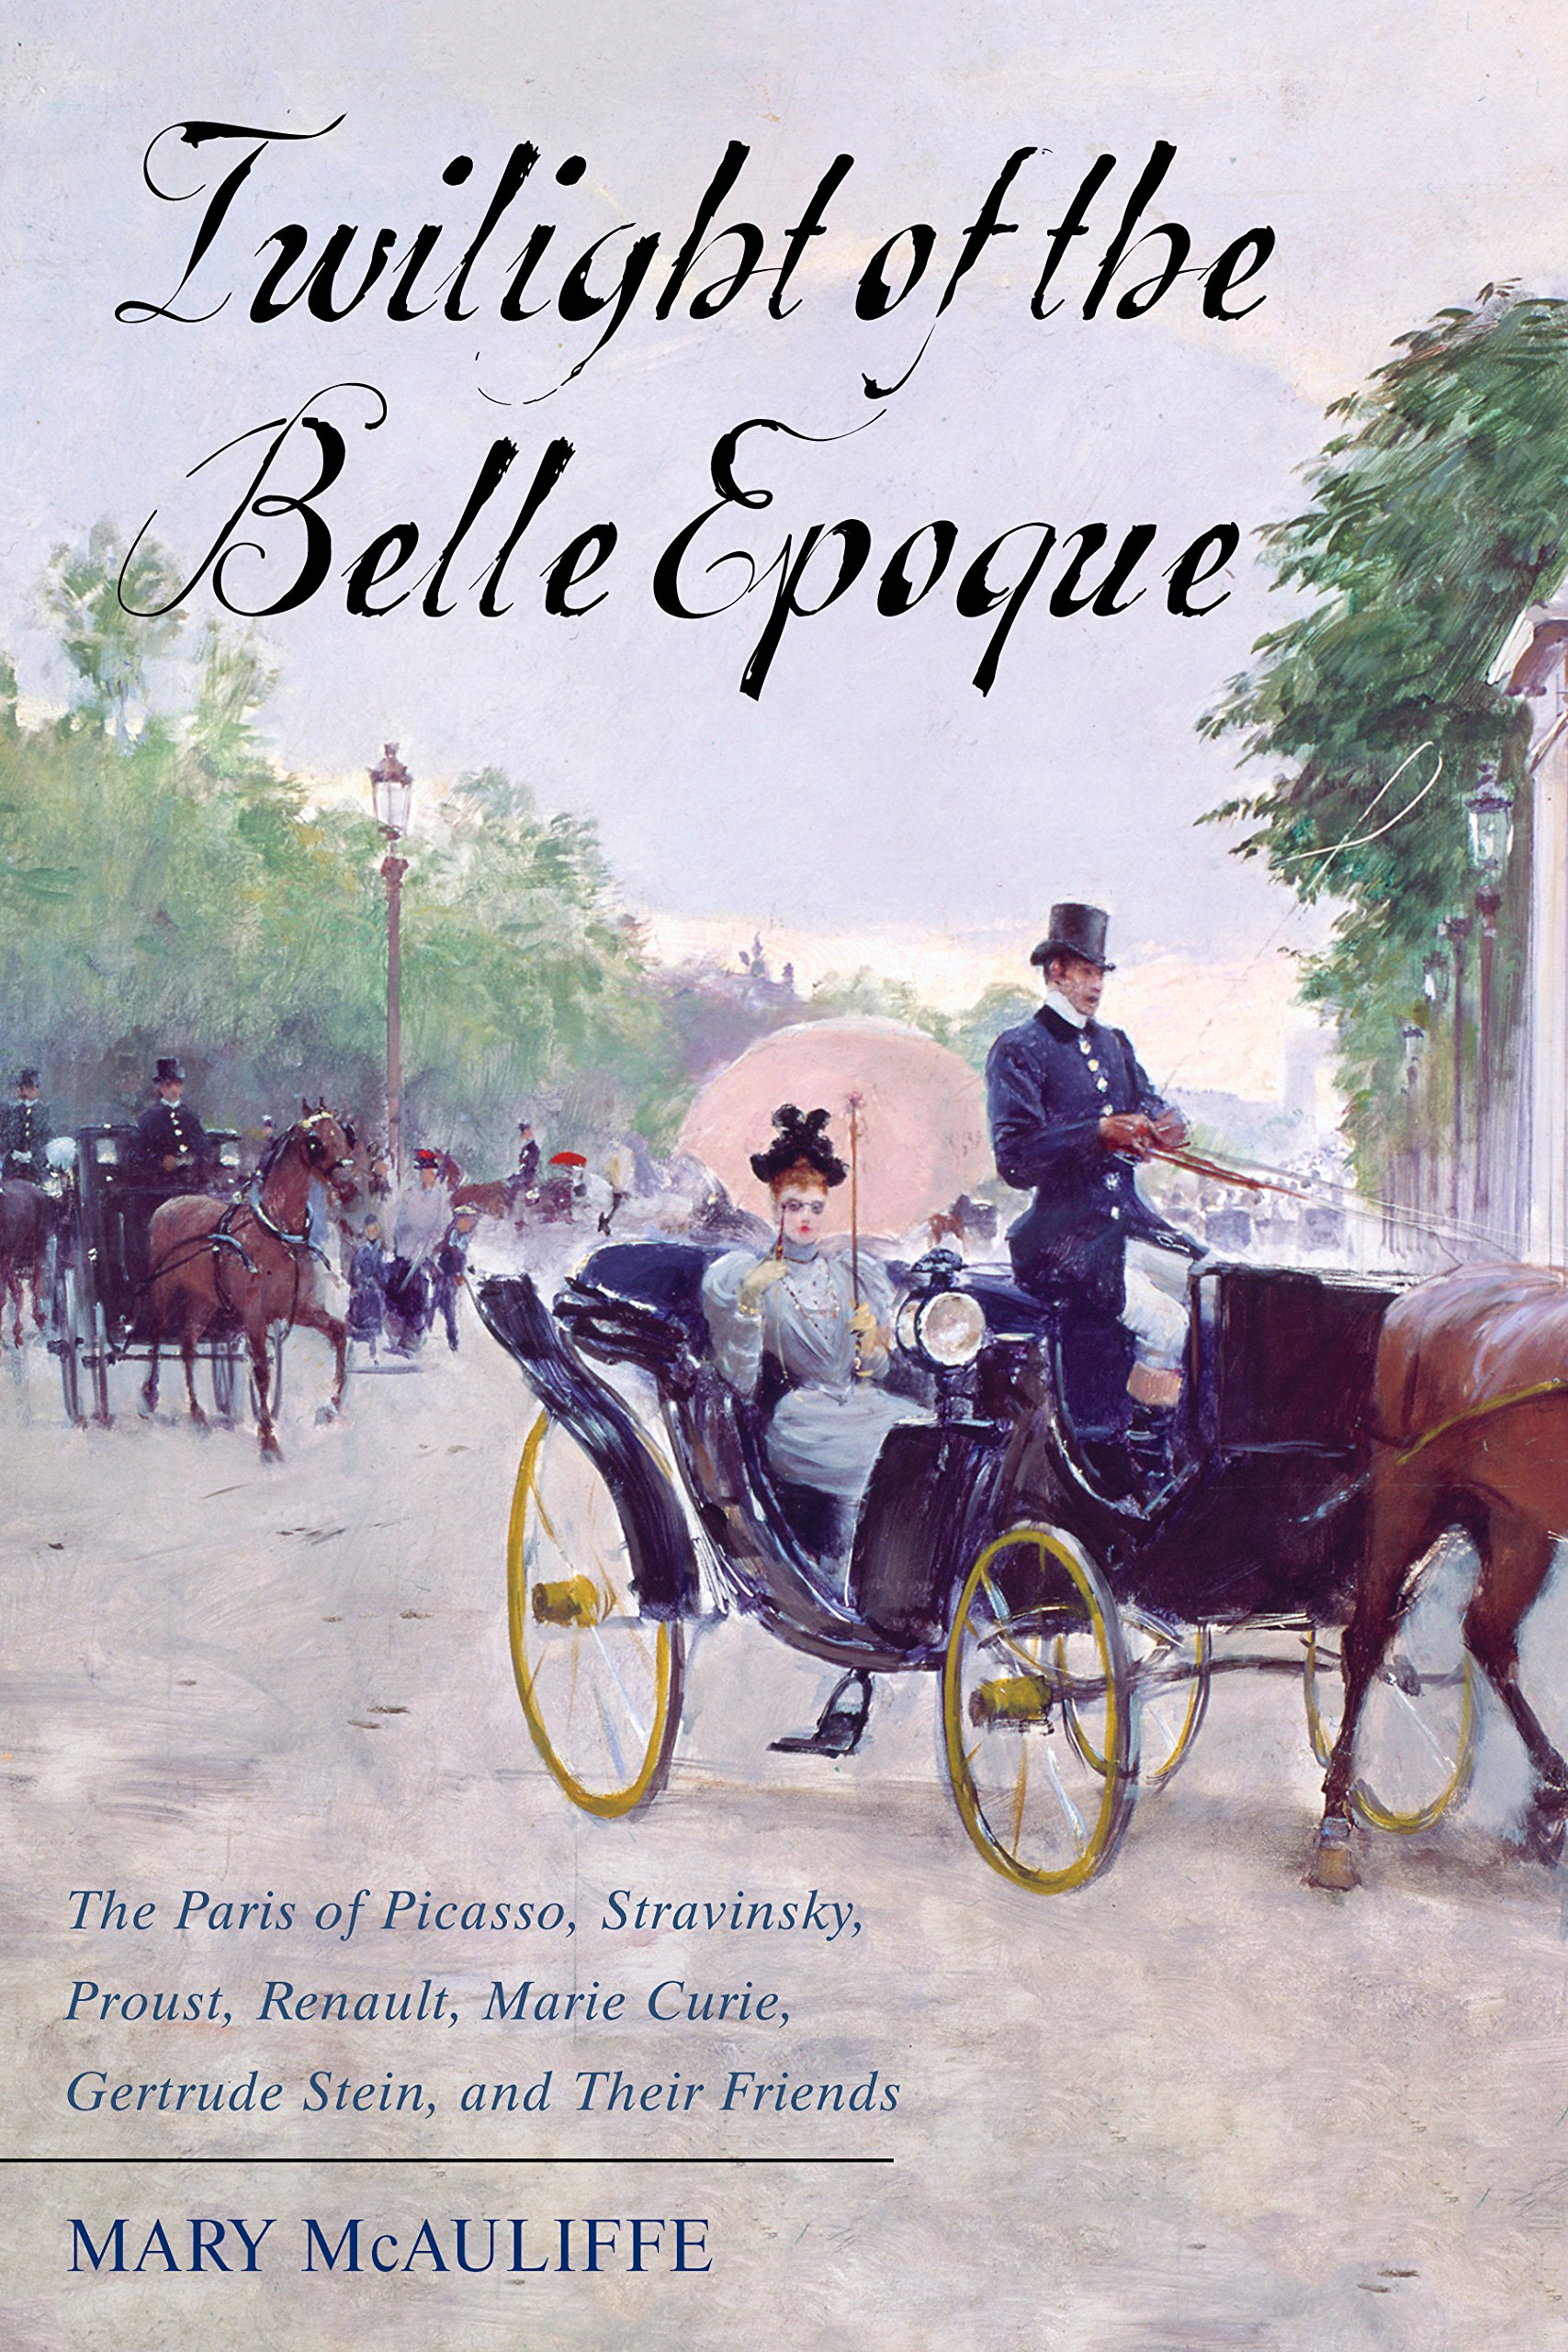 Book # 20 in 2018: “Twilight of the Belle Epoque” by Mary McAuliffe